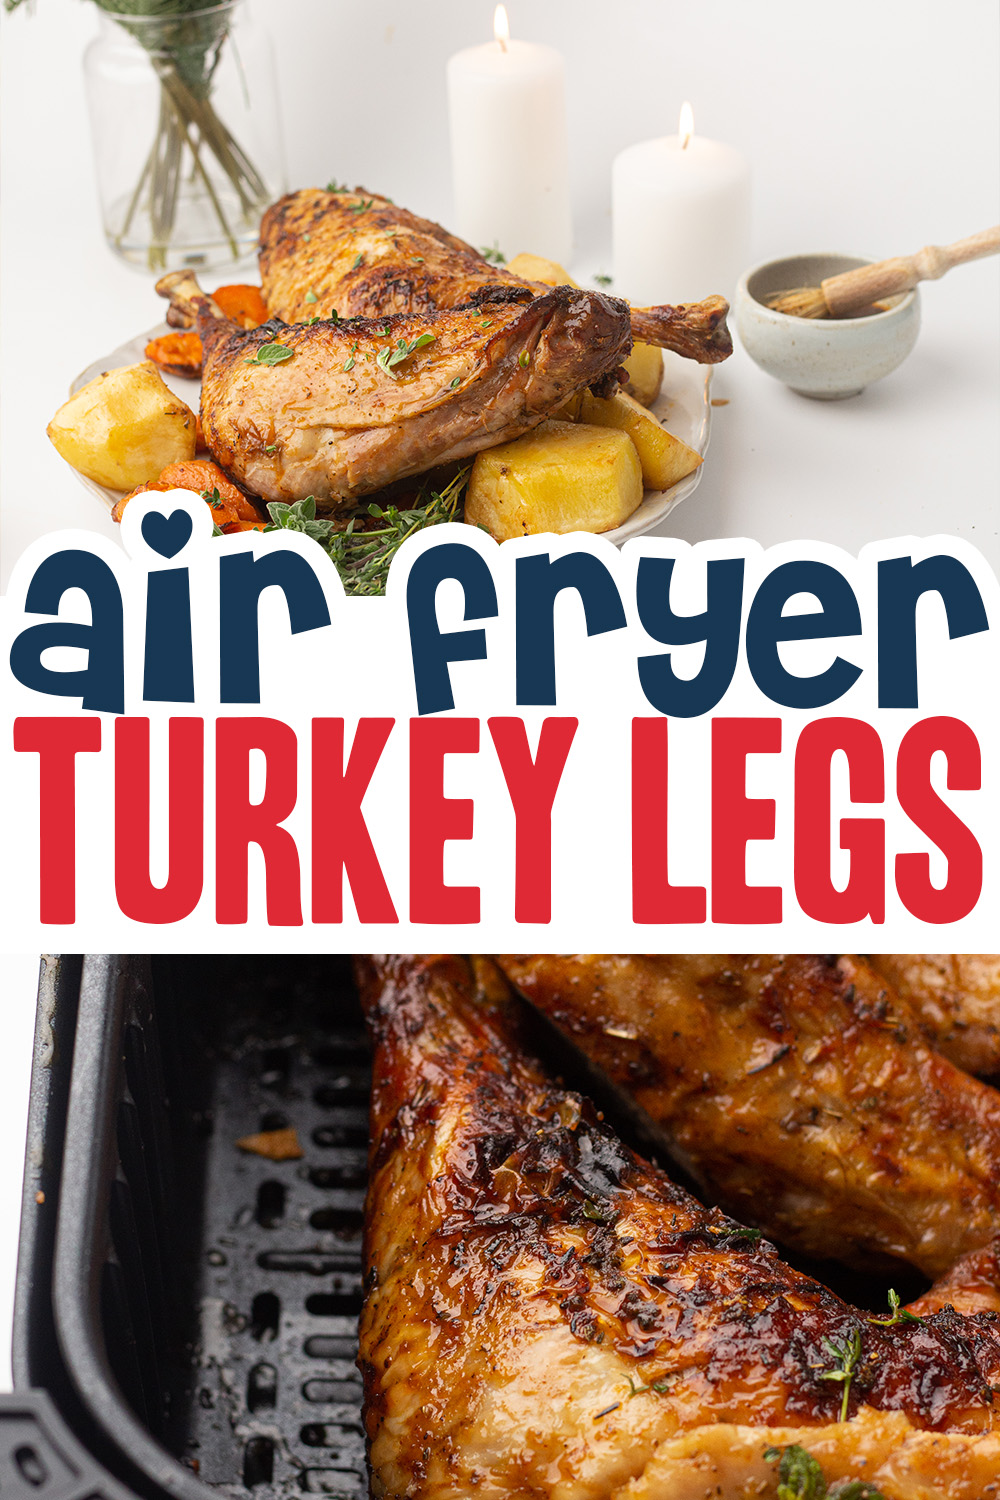 Air fryer turkey legs are seasoned magnificently and very easy to cook properly!